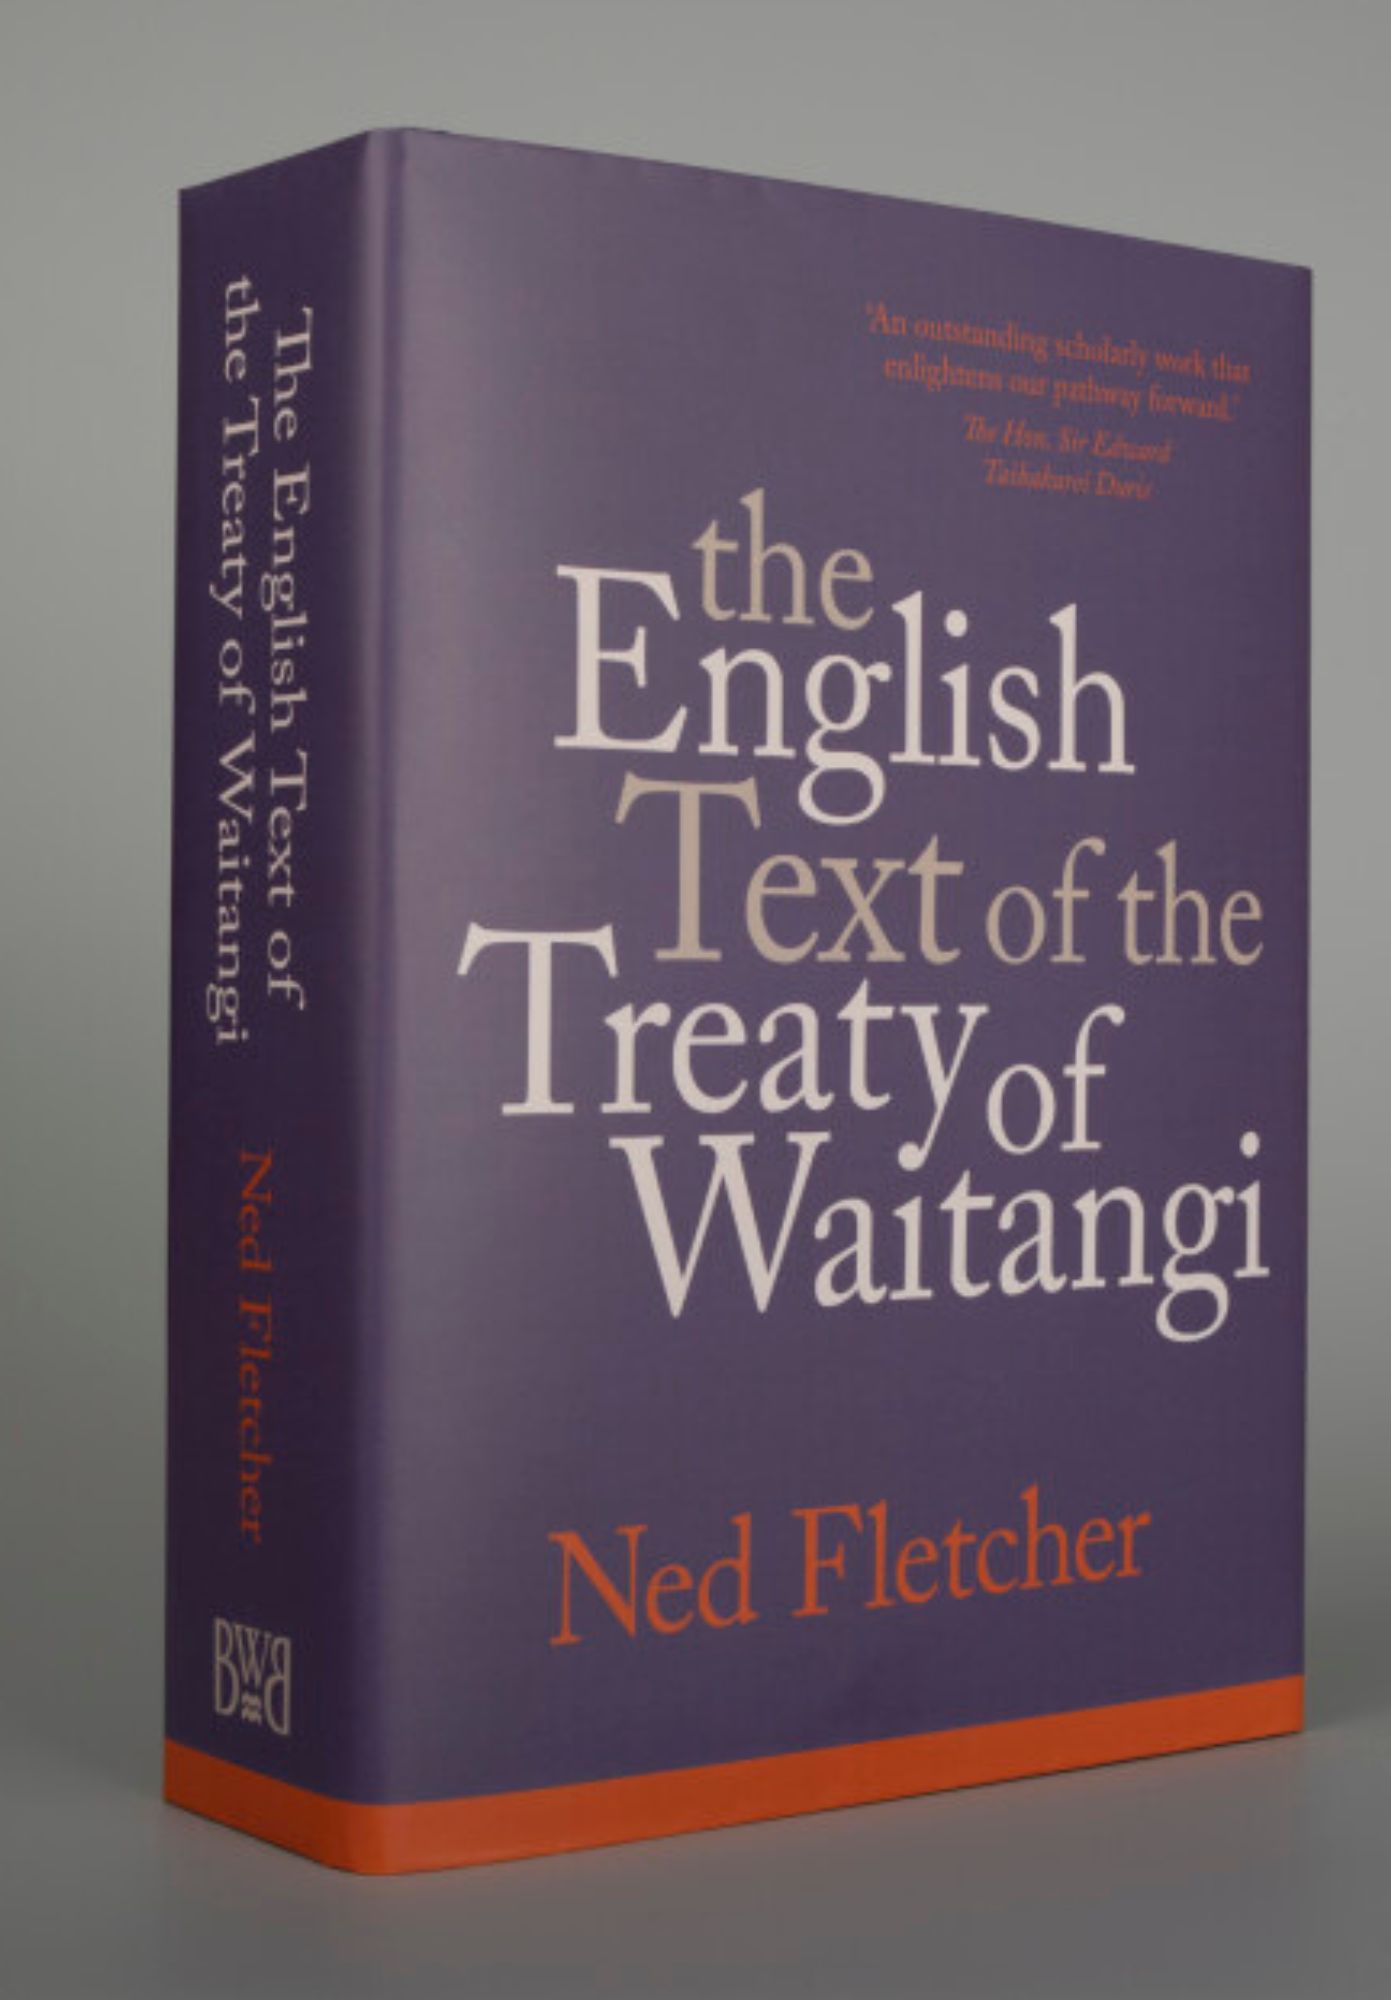 Picture of Ned Fletcher's book 'The English Text of the Treaty of Waitangi.'